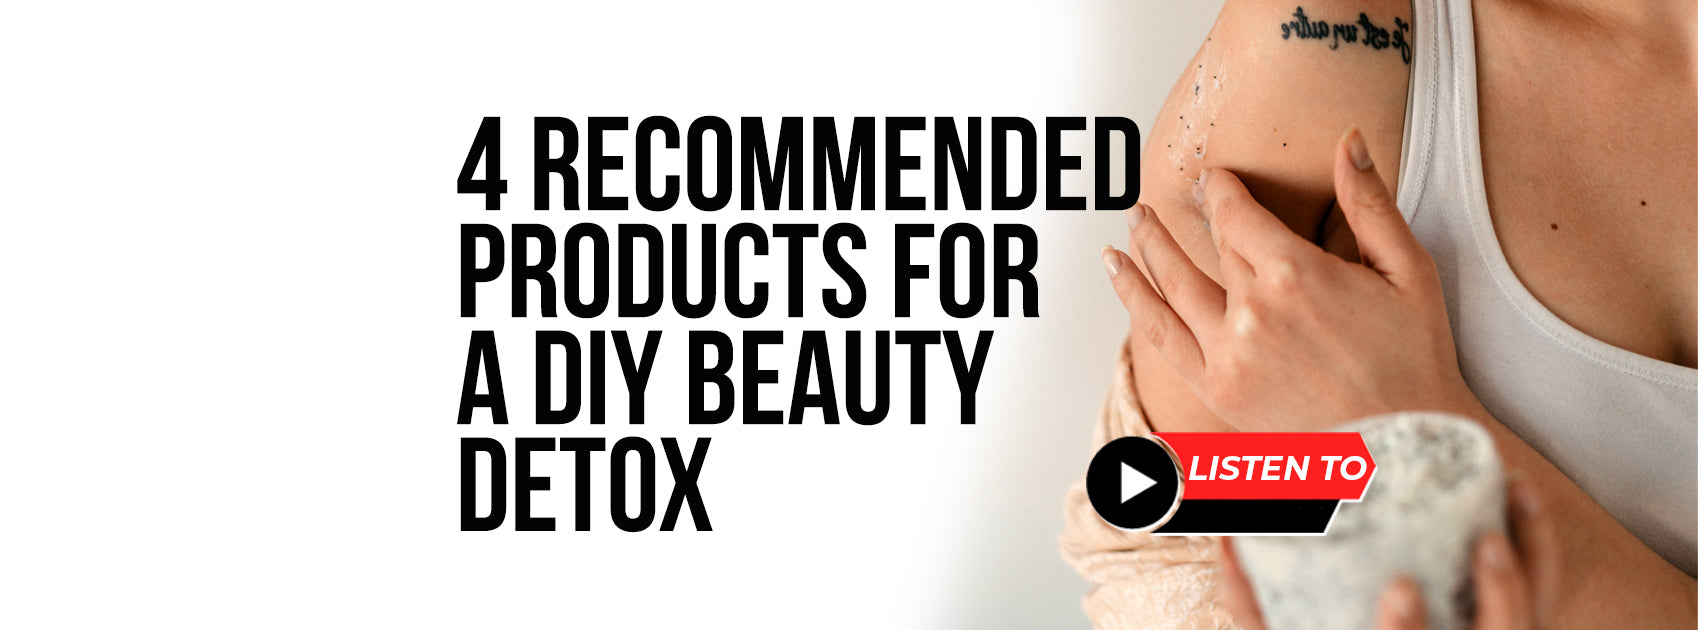 4 Recommended Products for a DIY Beauty Detox